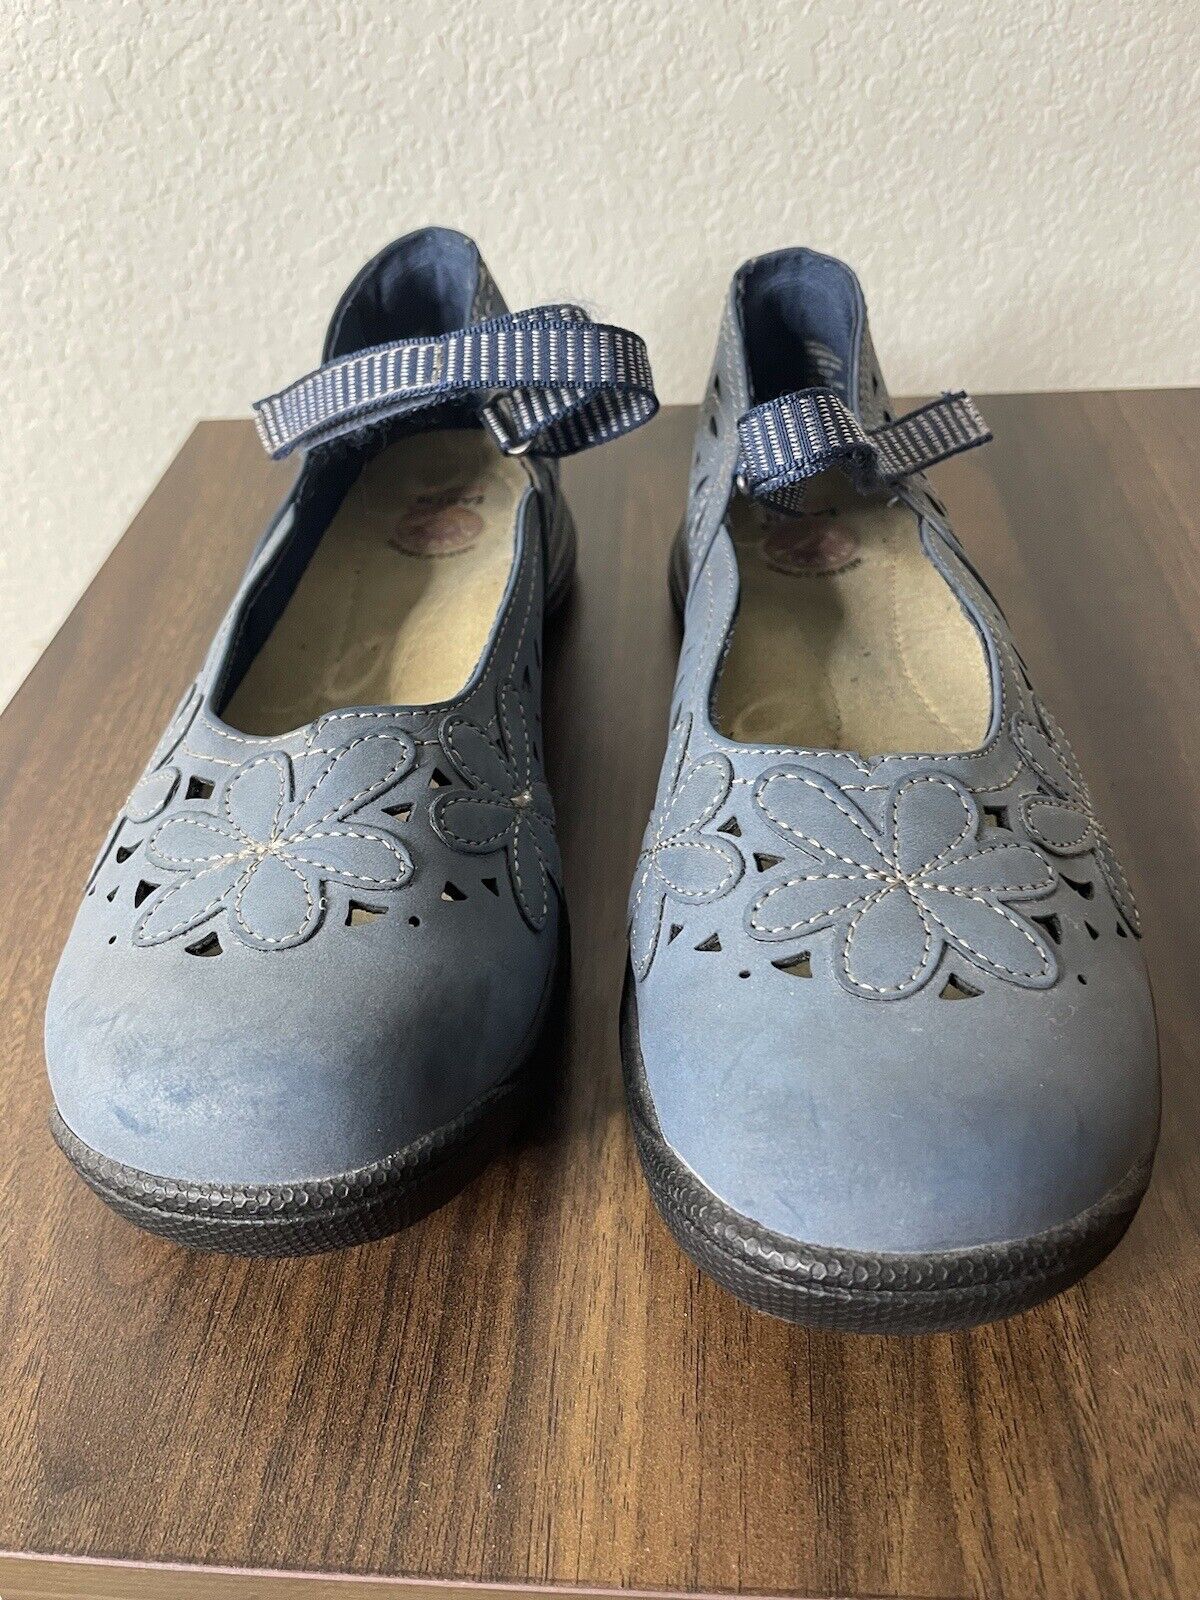 EARTH SPIRIT Mary Jane Blue Closed toe Perforated Shoes Size US 10